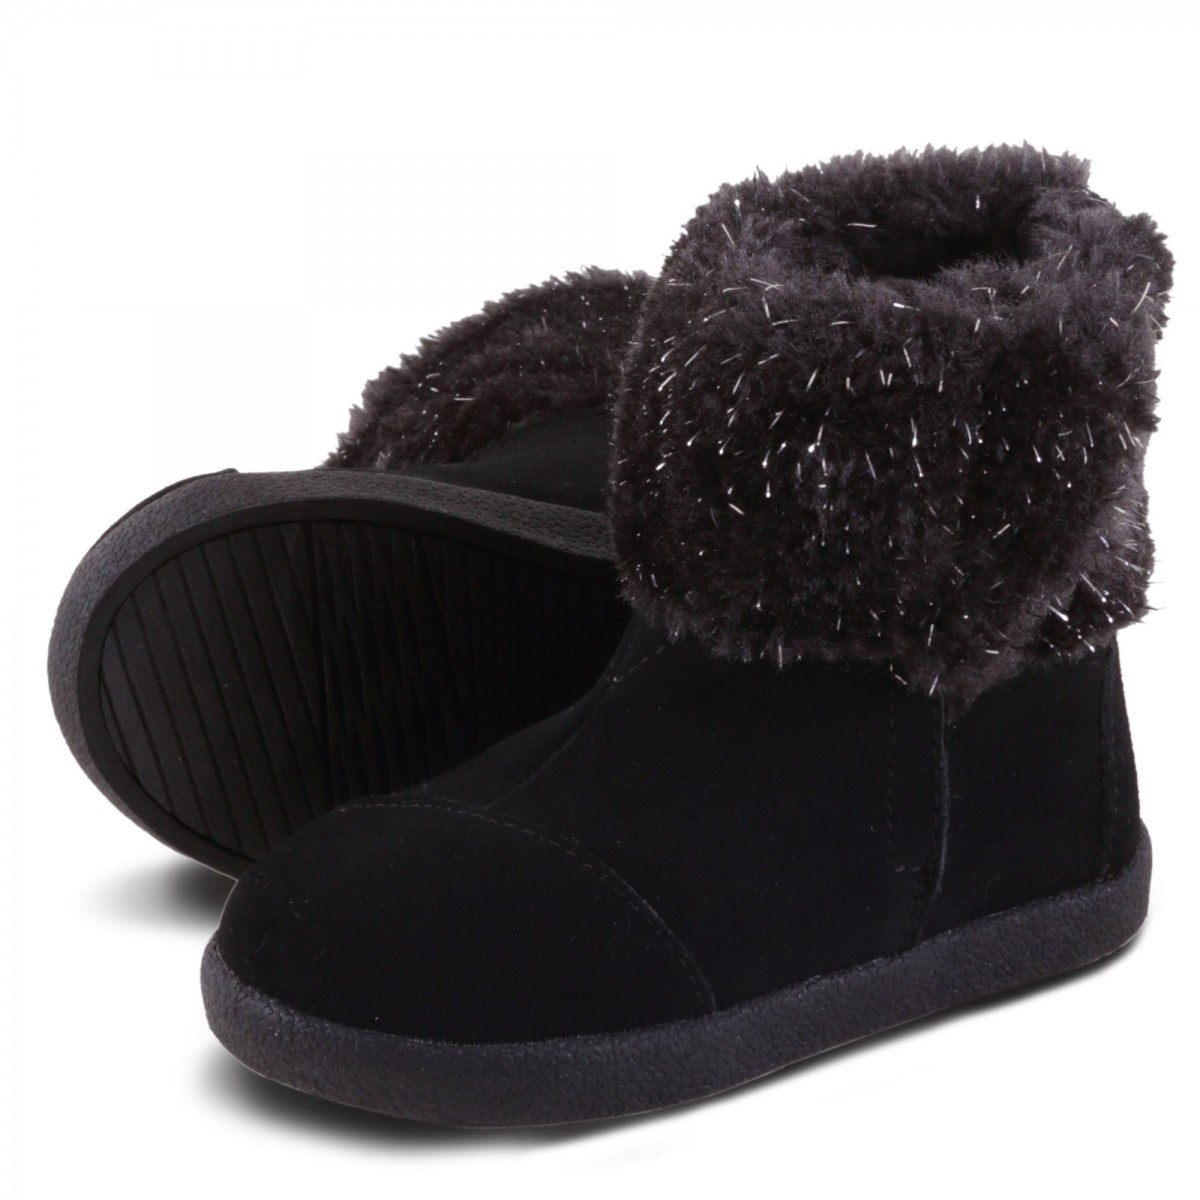 NEPAL BOOT SUEDE WITH FAUX FUR